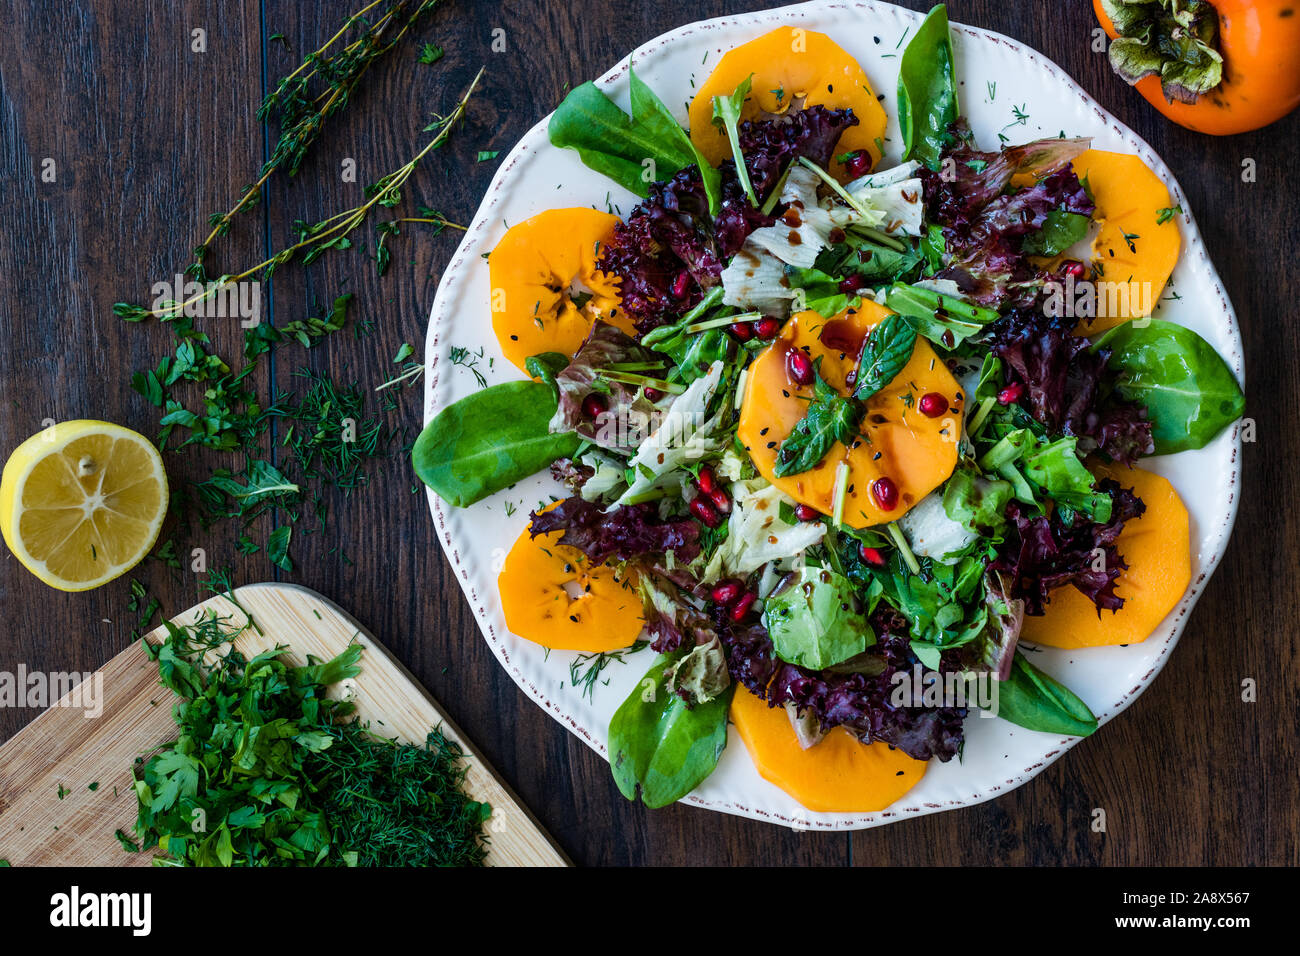 Persimmon Fruit Salad With Pomegranate Lollo Rosso Lettuce Rocket Arugula Or Rucola And Mint Leaves Organic Food Stock Photo Alamy